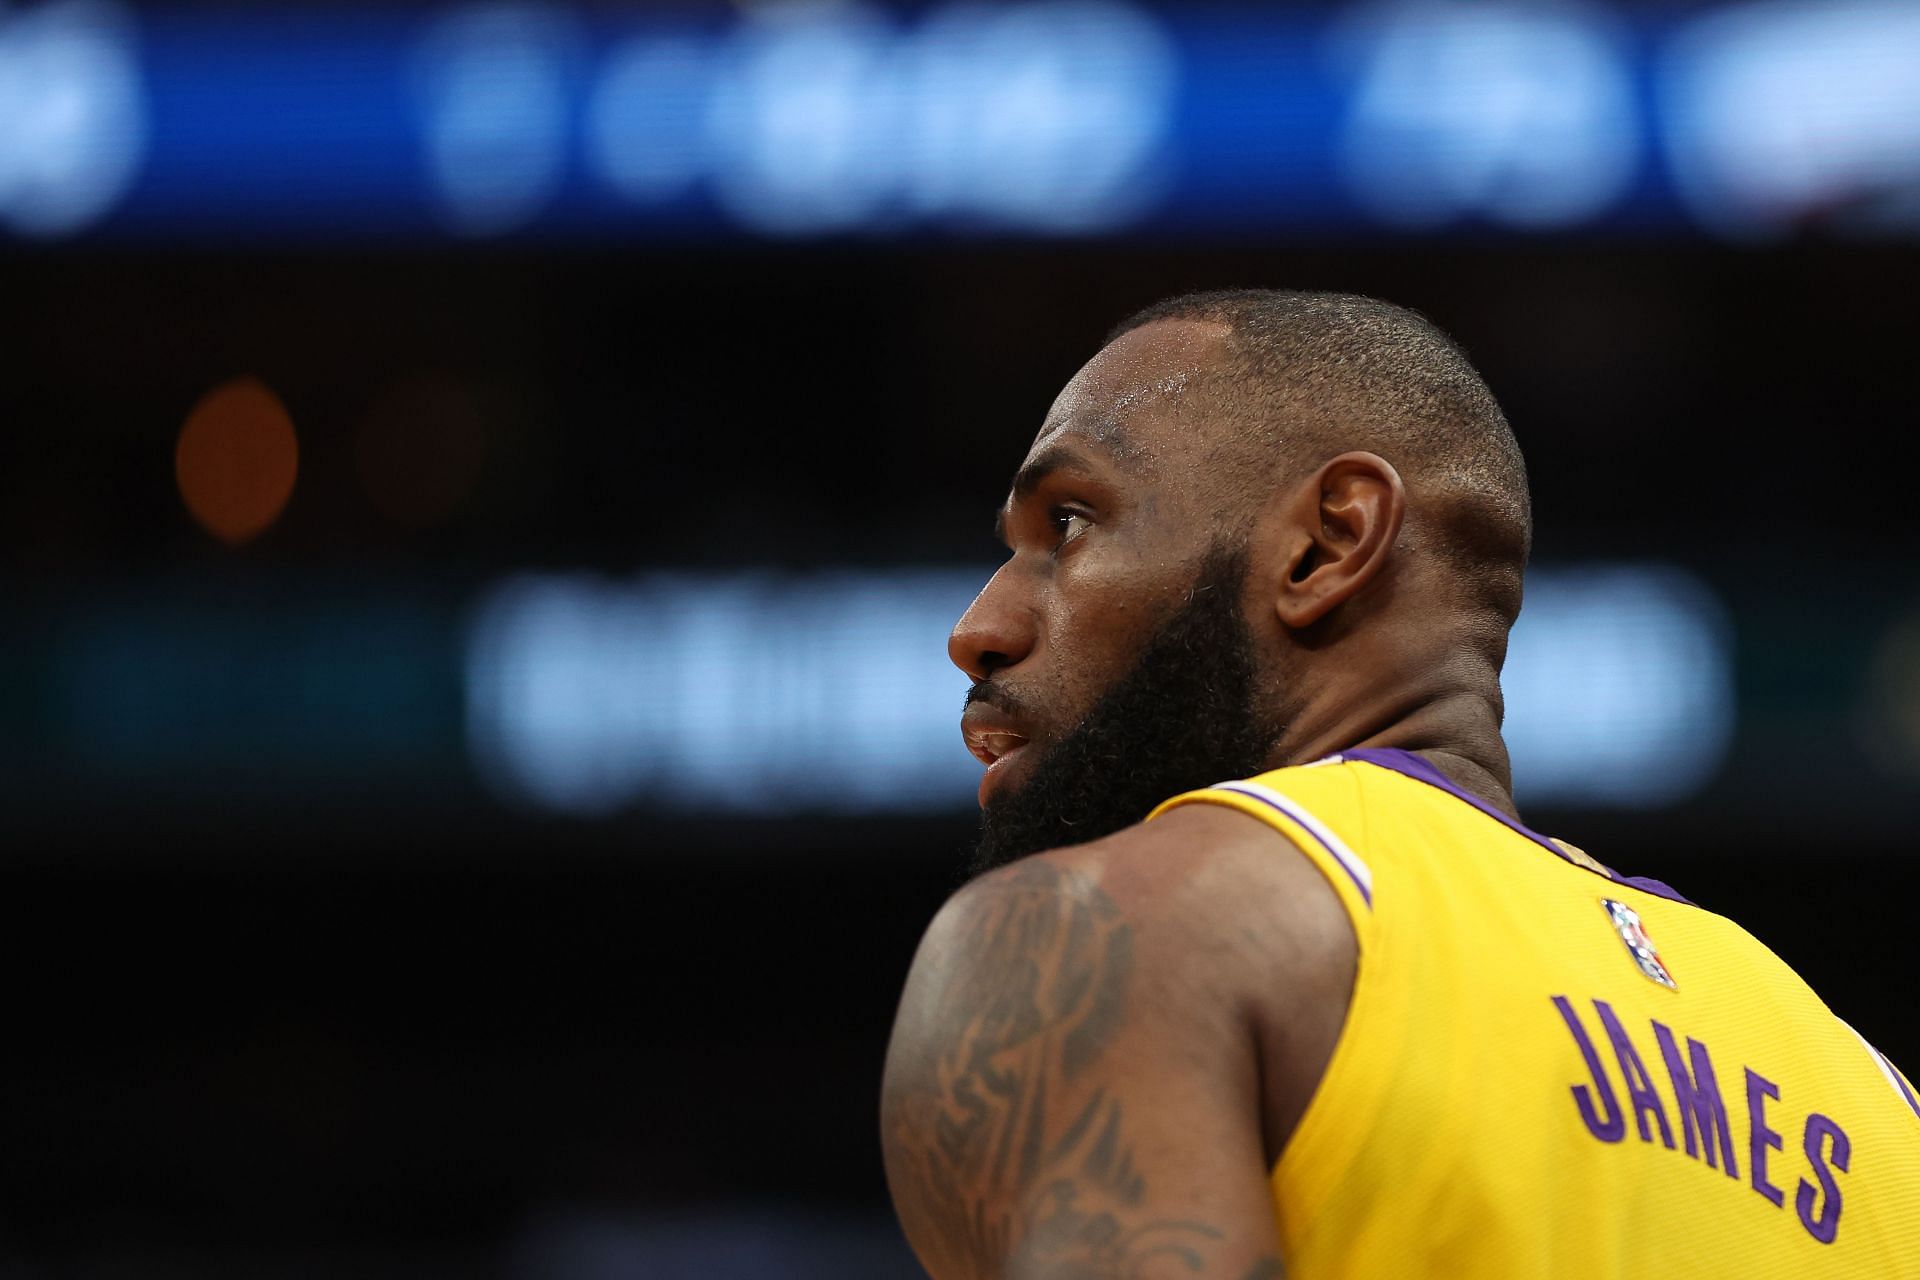 LeBron James of the LA Lakers against the Washington Wizards on March 19 in Washington, DC